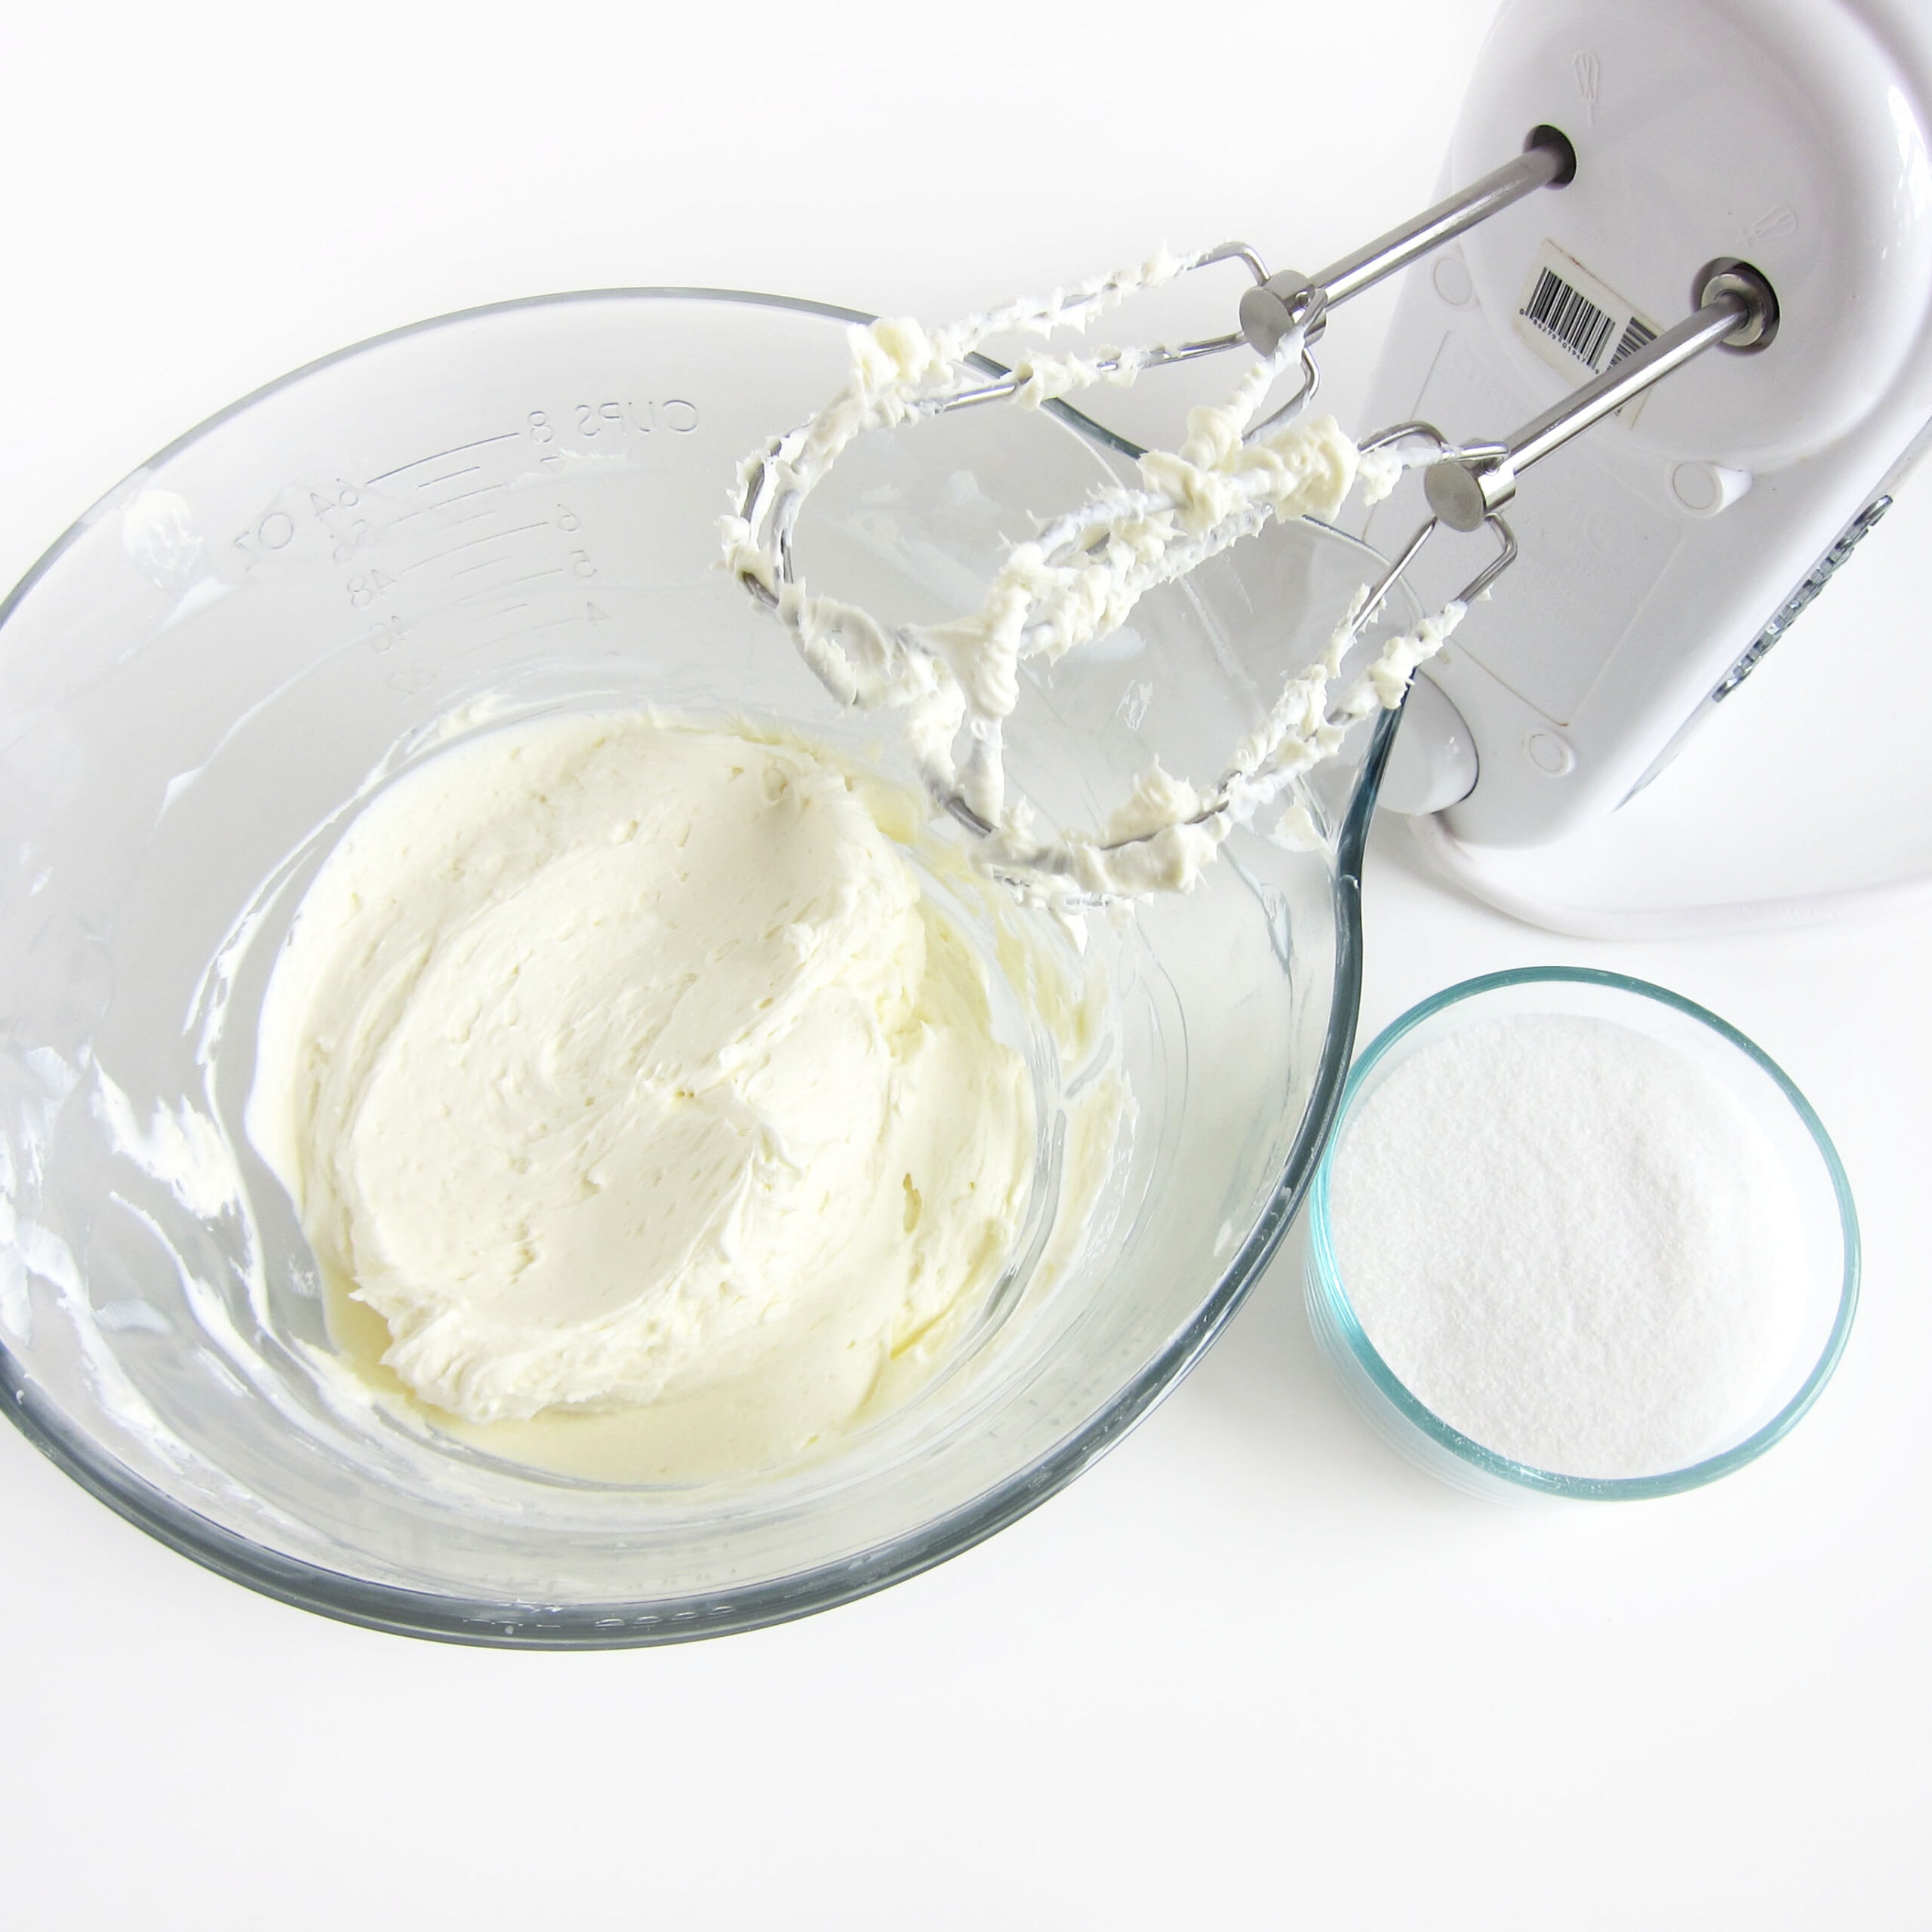 Cream cheese beaten until creamy in a mixing bowl next to a bowl of sugar and a mixer.